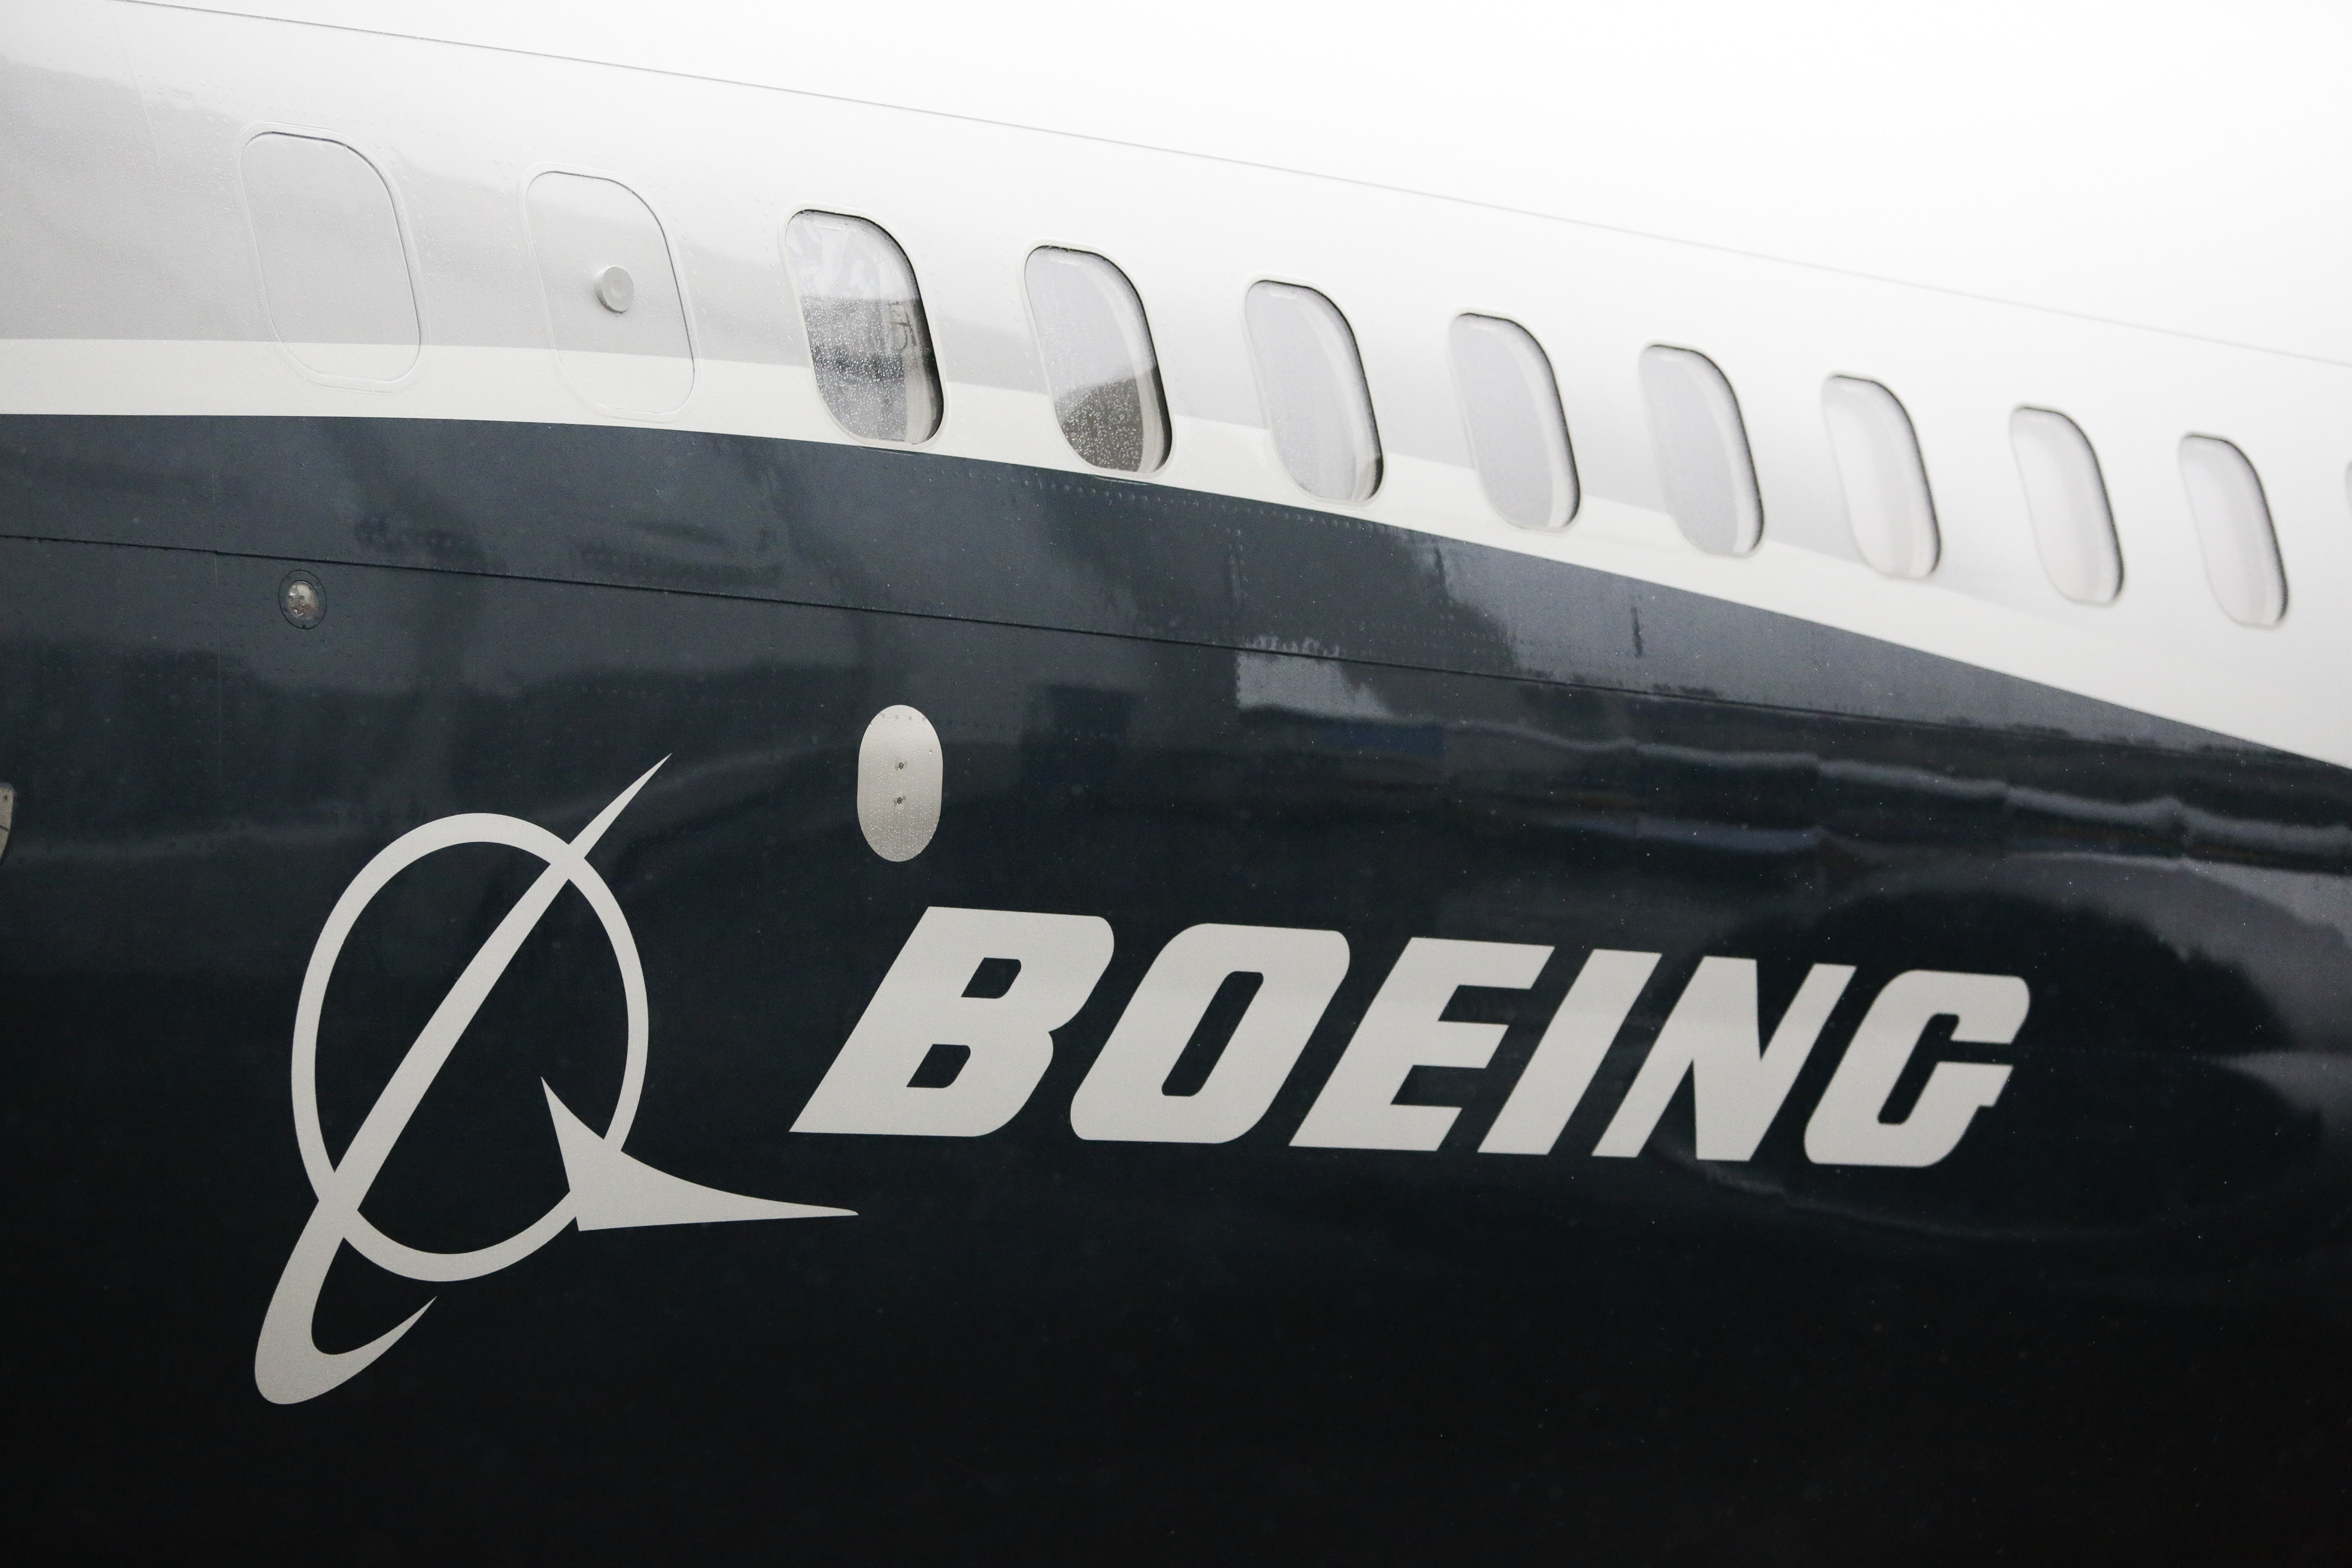 The Boeing logo on an airplaine